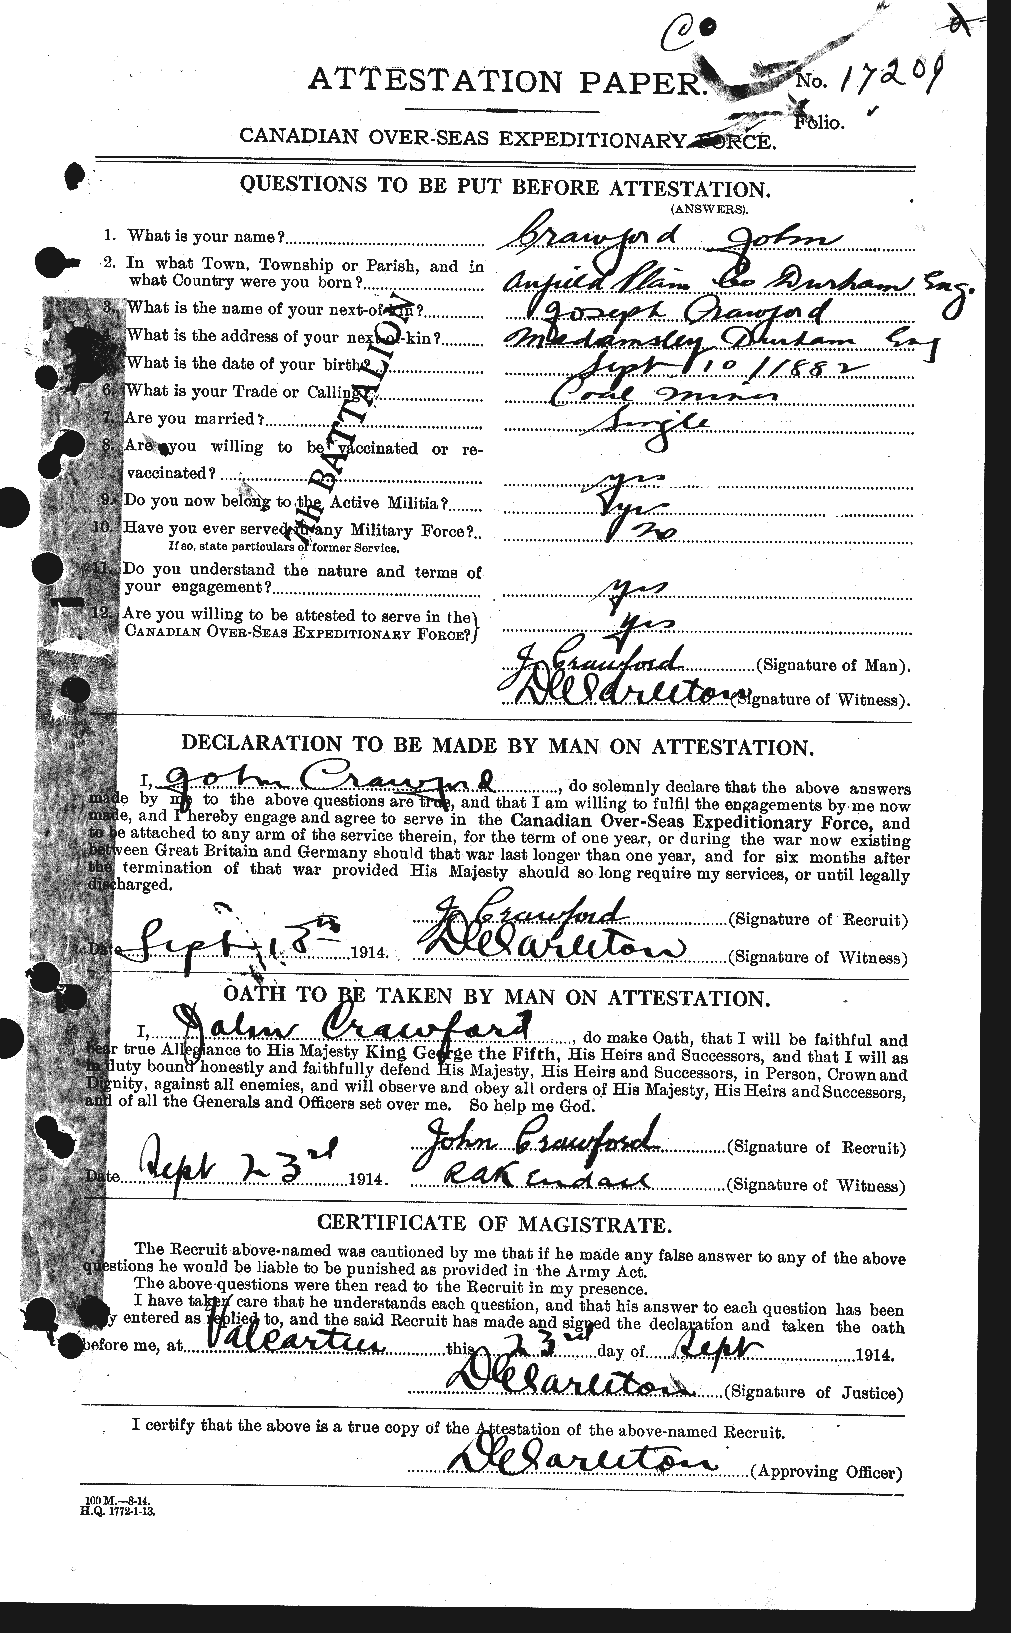 Personnel Records of the First World War - CEF 062452a